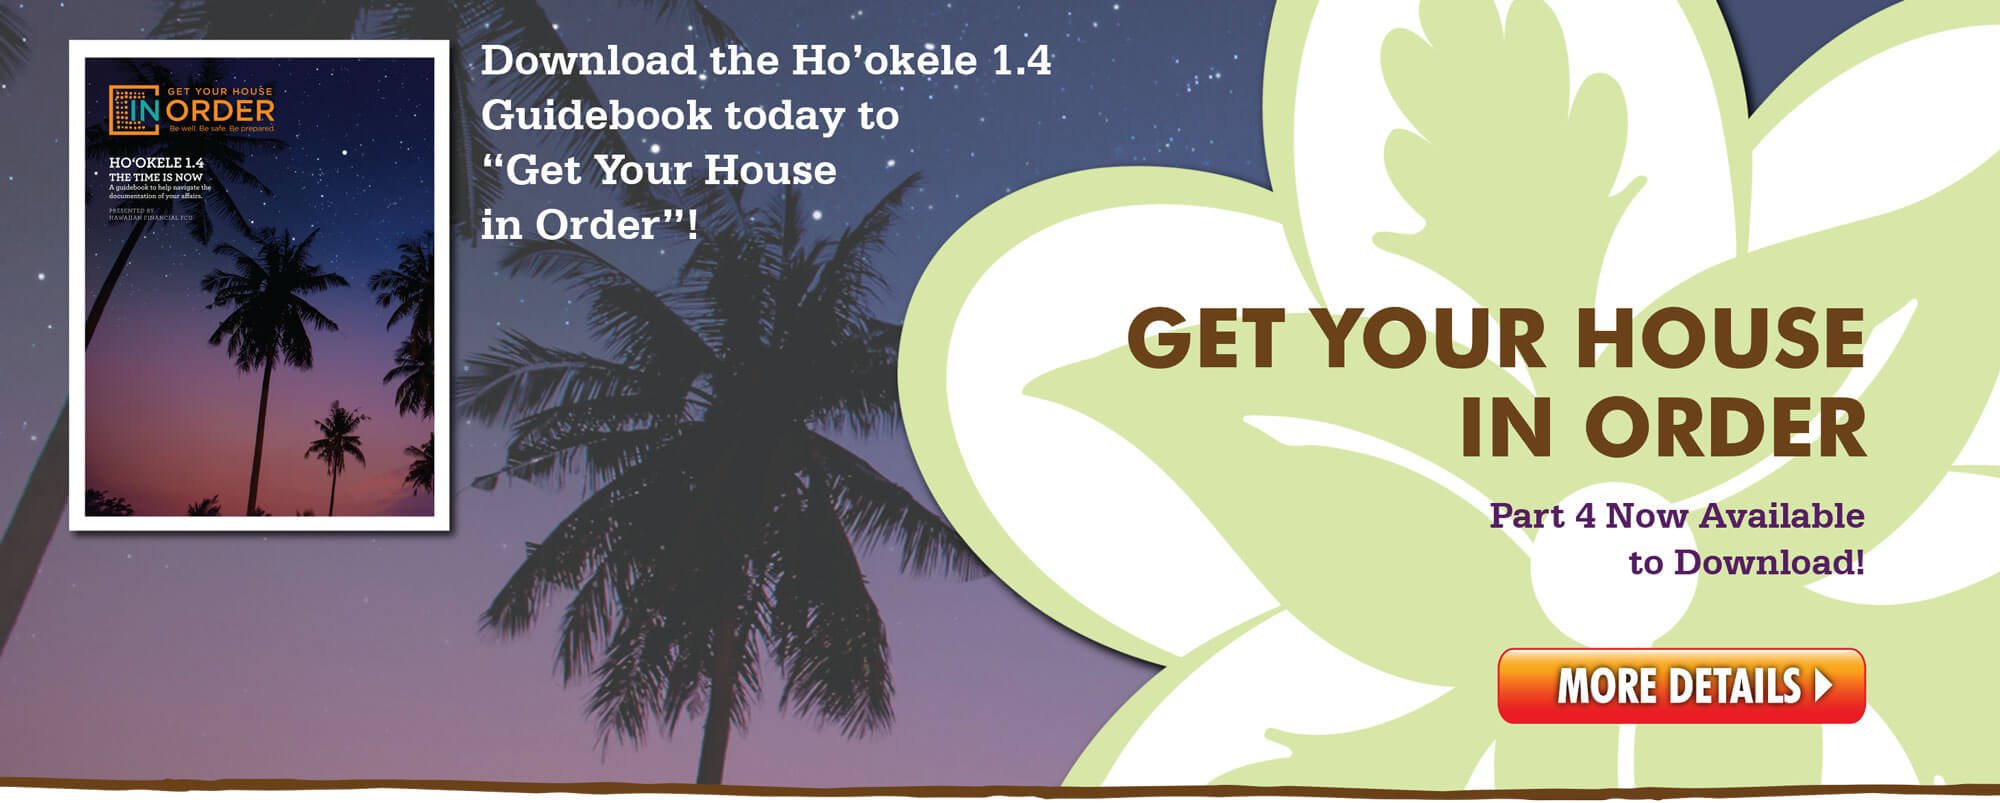 Download the Ho'okele 1.4 Guidebook today to Get Your House in Order!